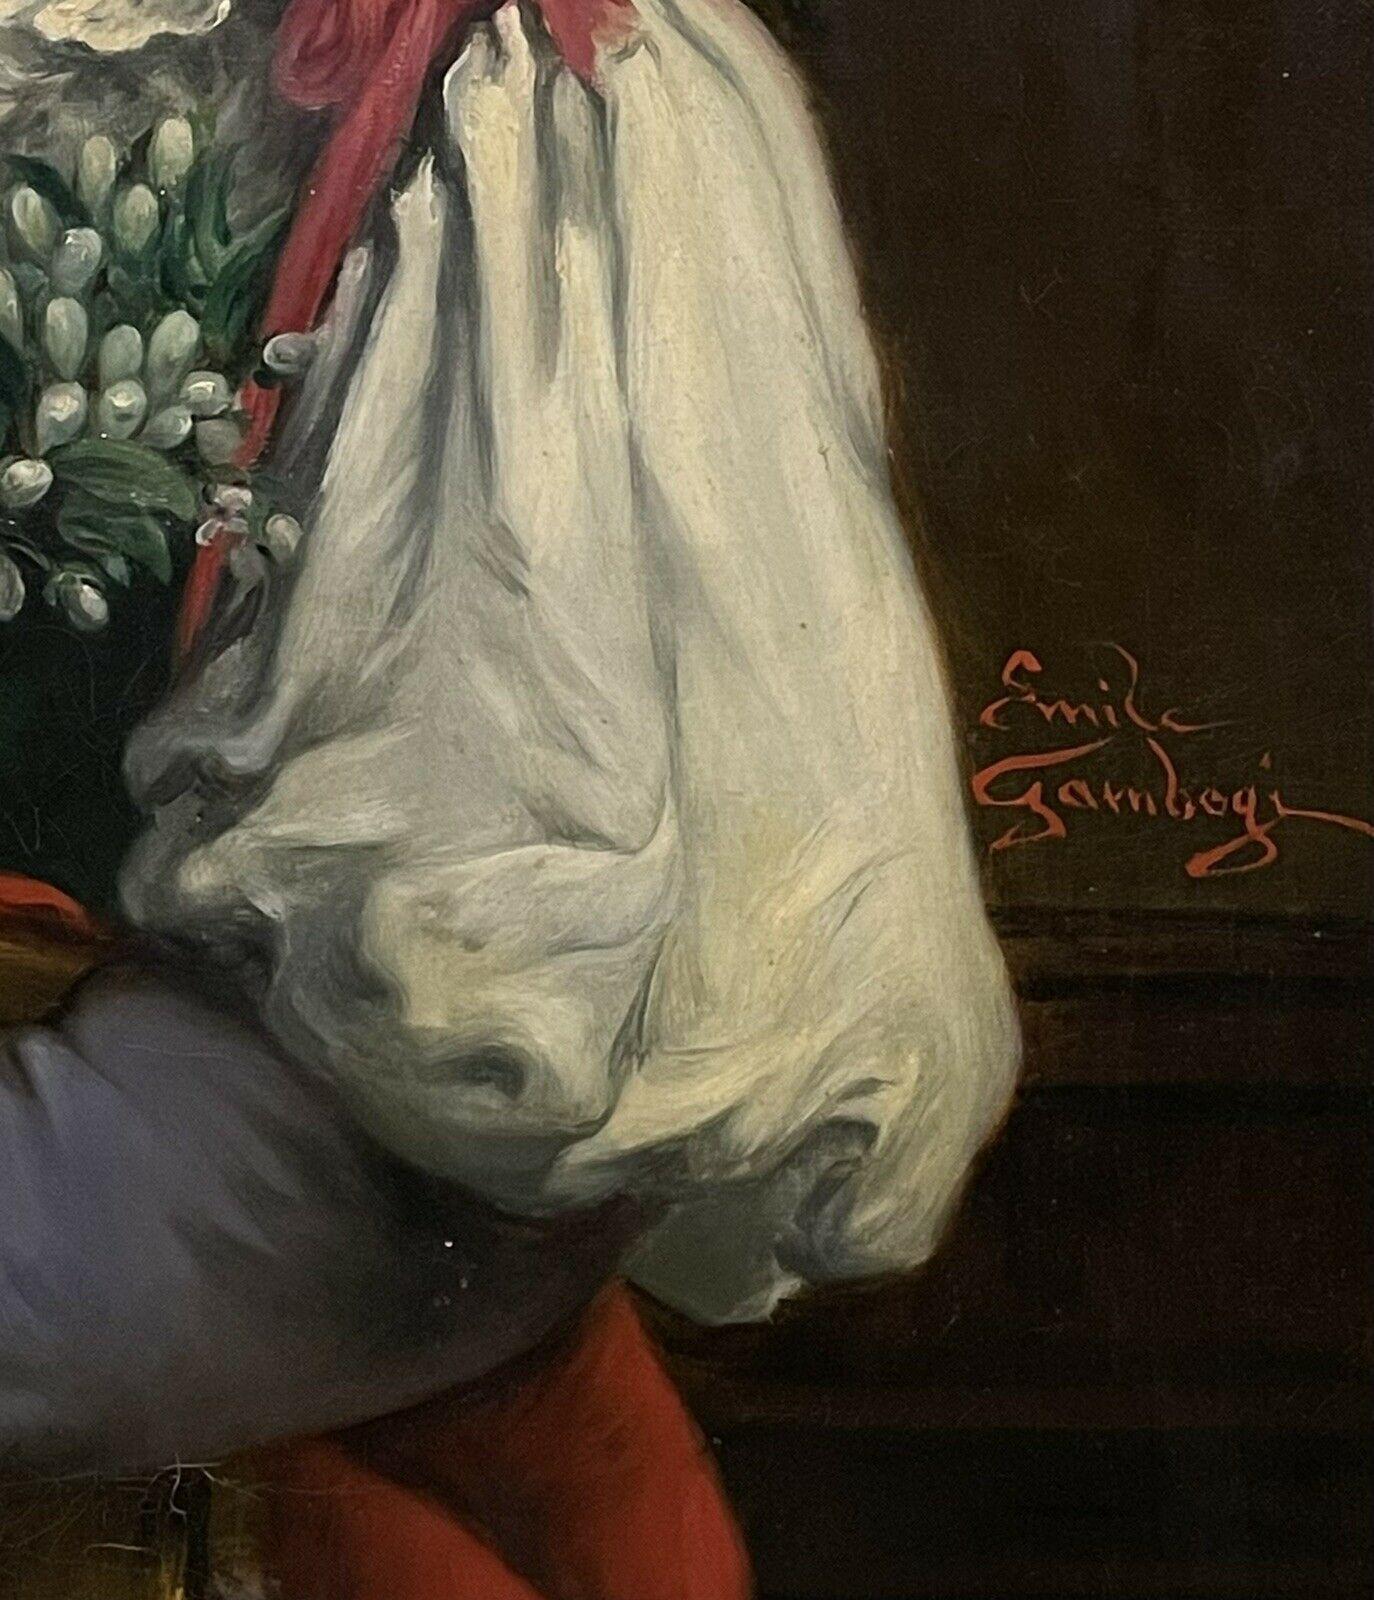 Artist/ School: Italian School, 19th century. indistinctly signed

Title: Portrait of a Young Country Lady

Medium: signed oil painting on canvas, framed.

framed: 31.25 x 23 inches
canvas:  23.5 x 15.5 inches

Provenance: private collection,